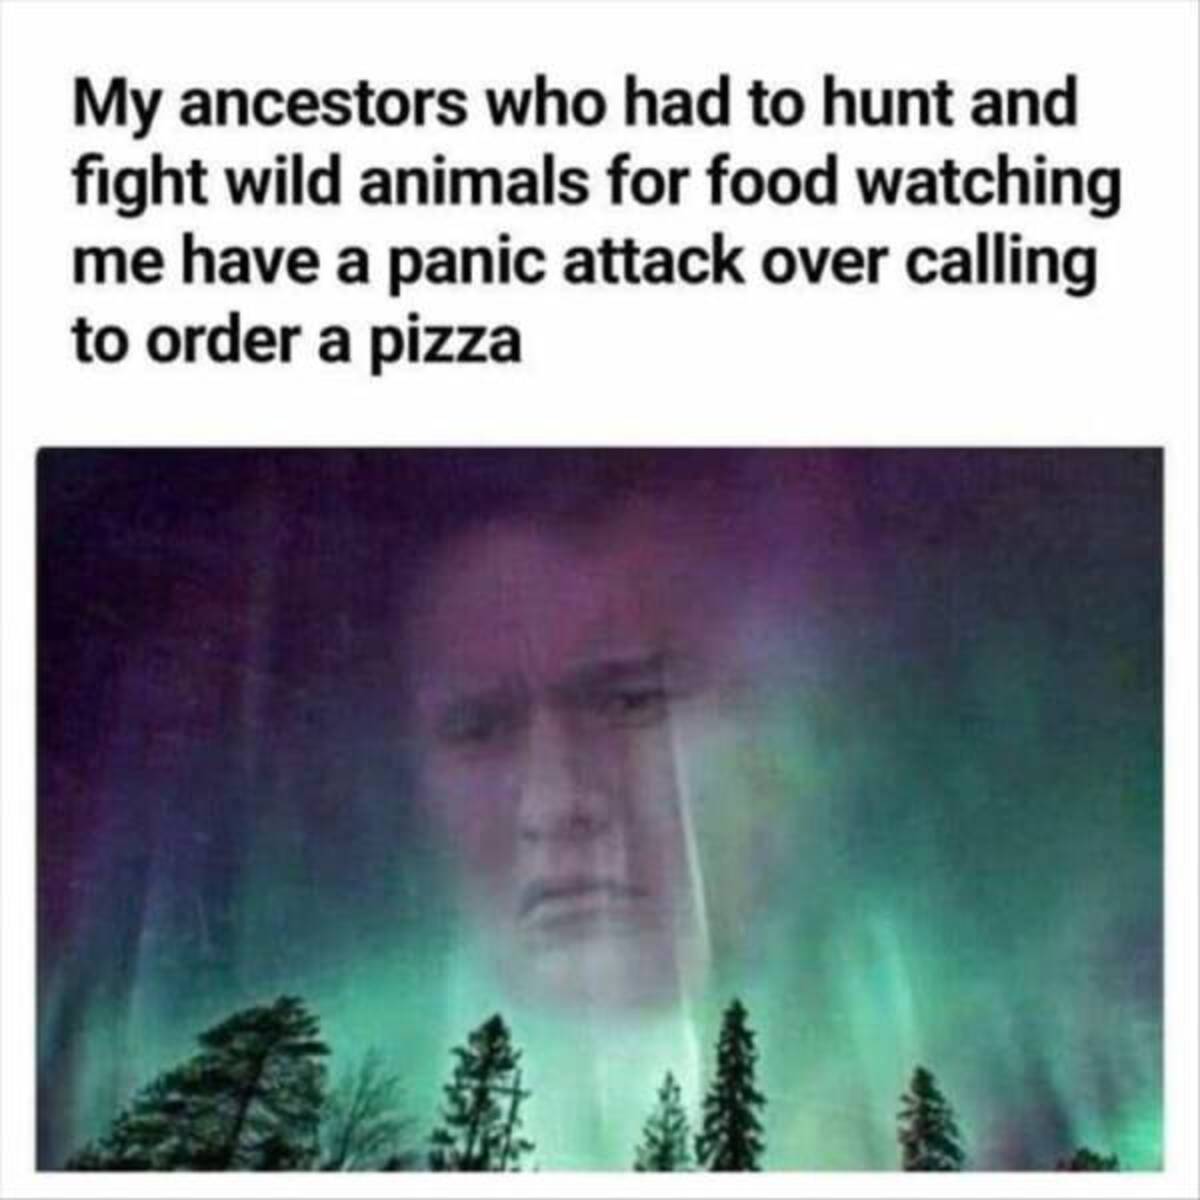 photo caption - My ancestors who had to hunt and fight wild animals for food watching me have a panic attack over calling to order a pizza